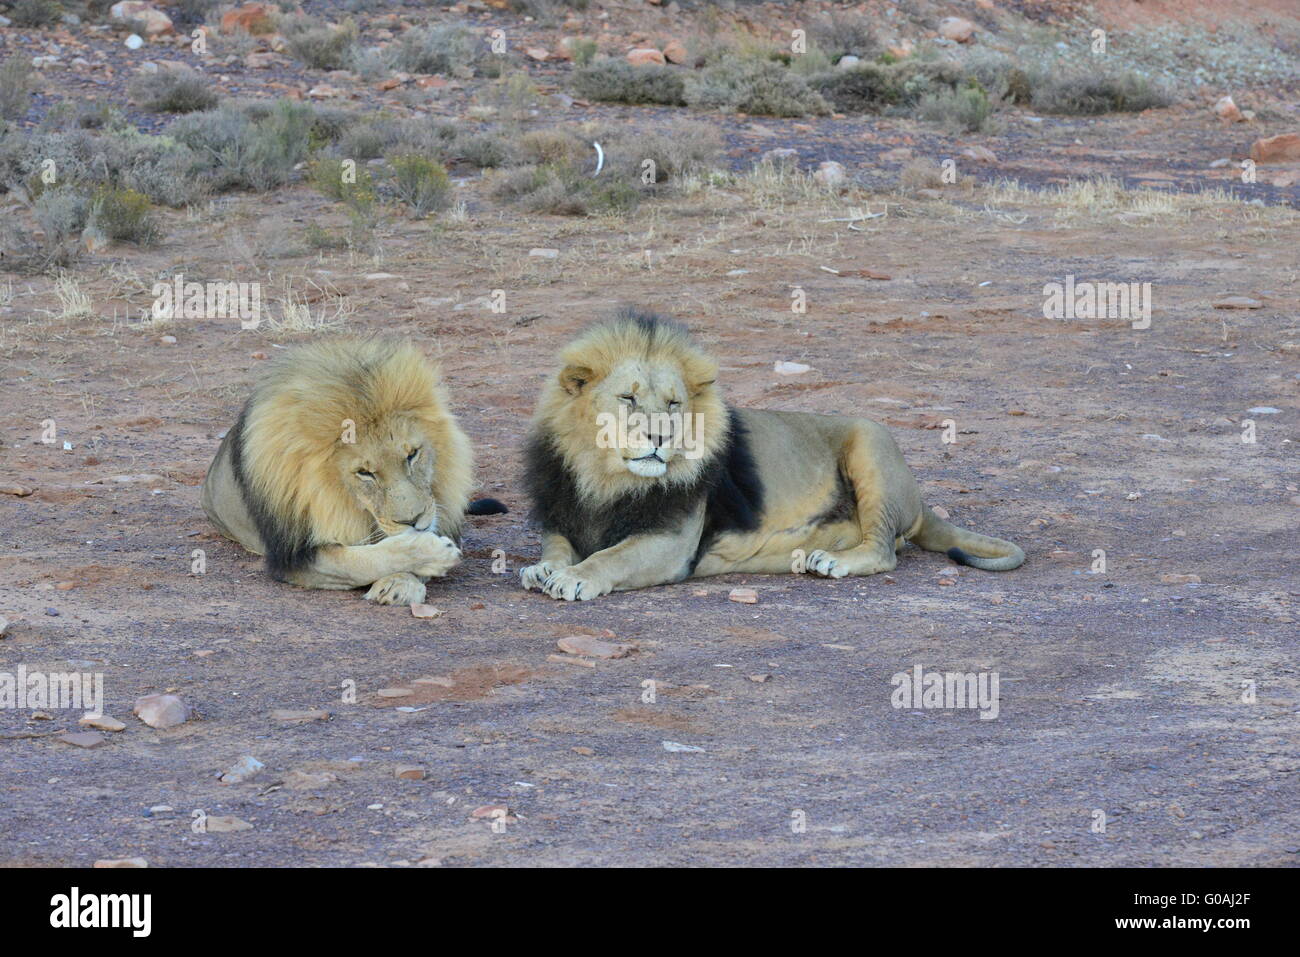 A pair of black maned lions at sunset in South Africa Stock Photo